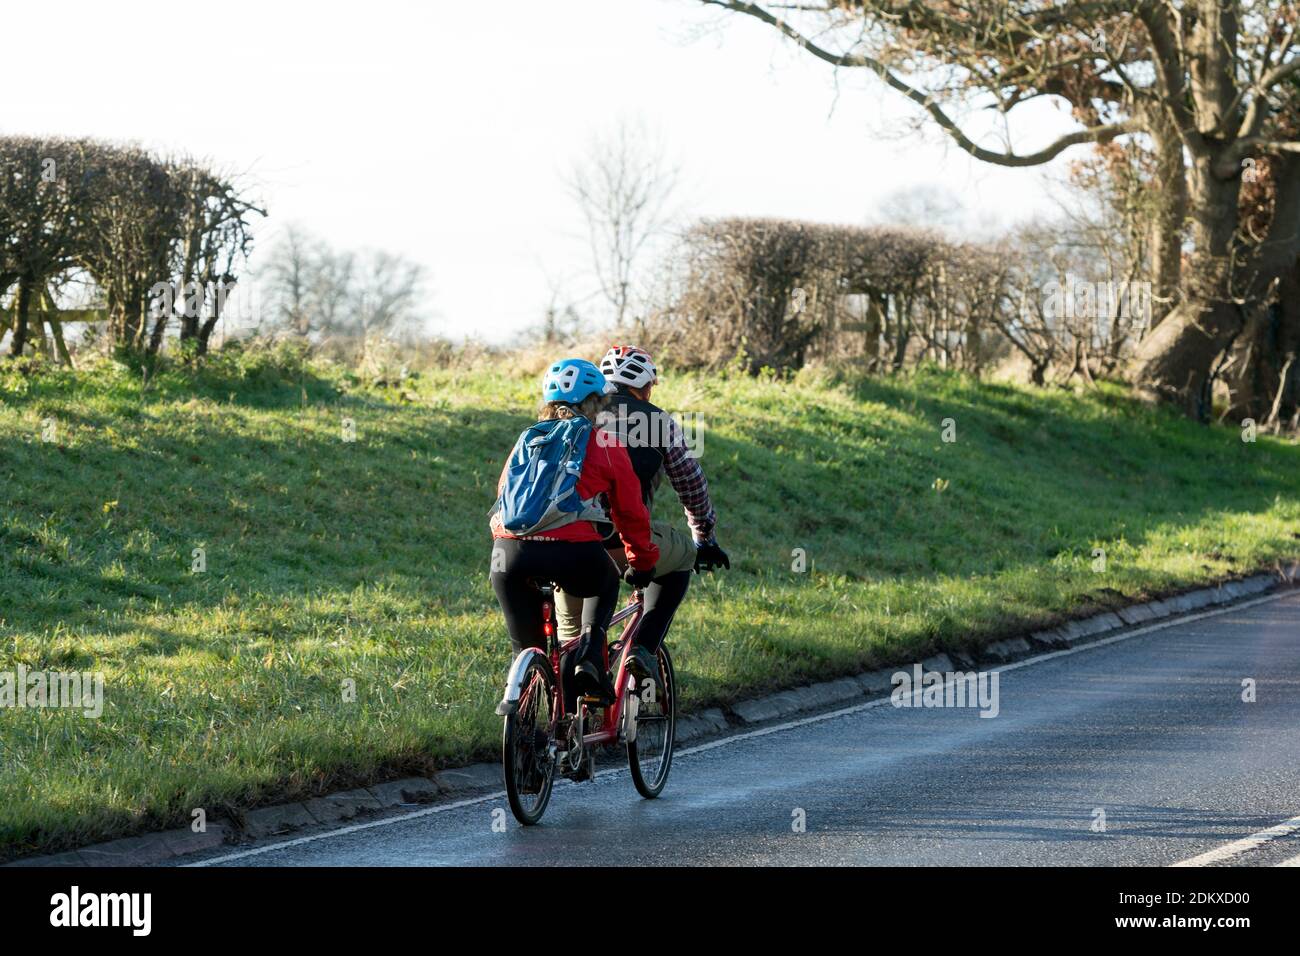 A tandem bicycle ridden on a country road in winter, Warwickshire, England, UK Stock Photo